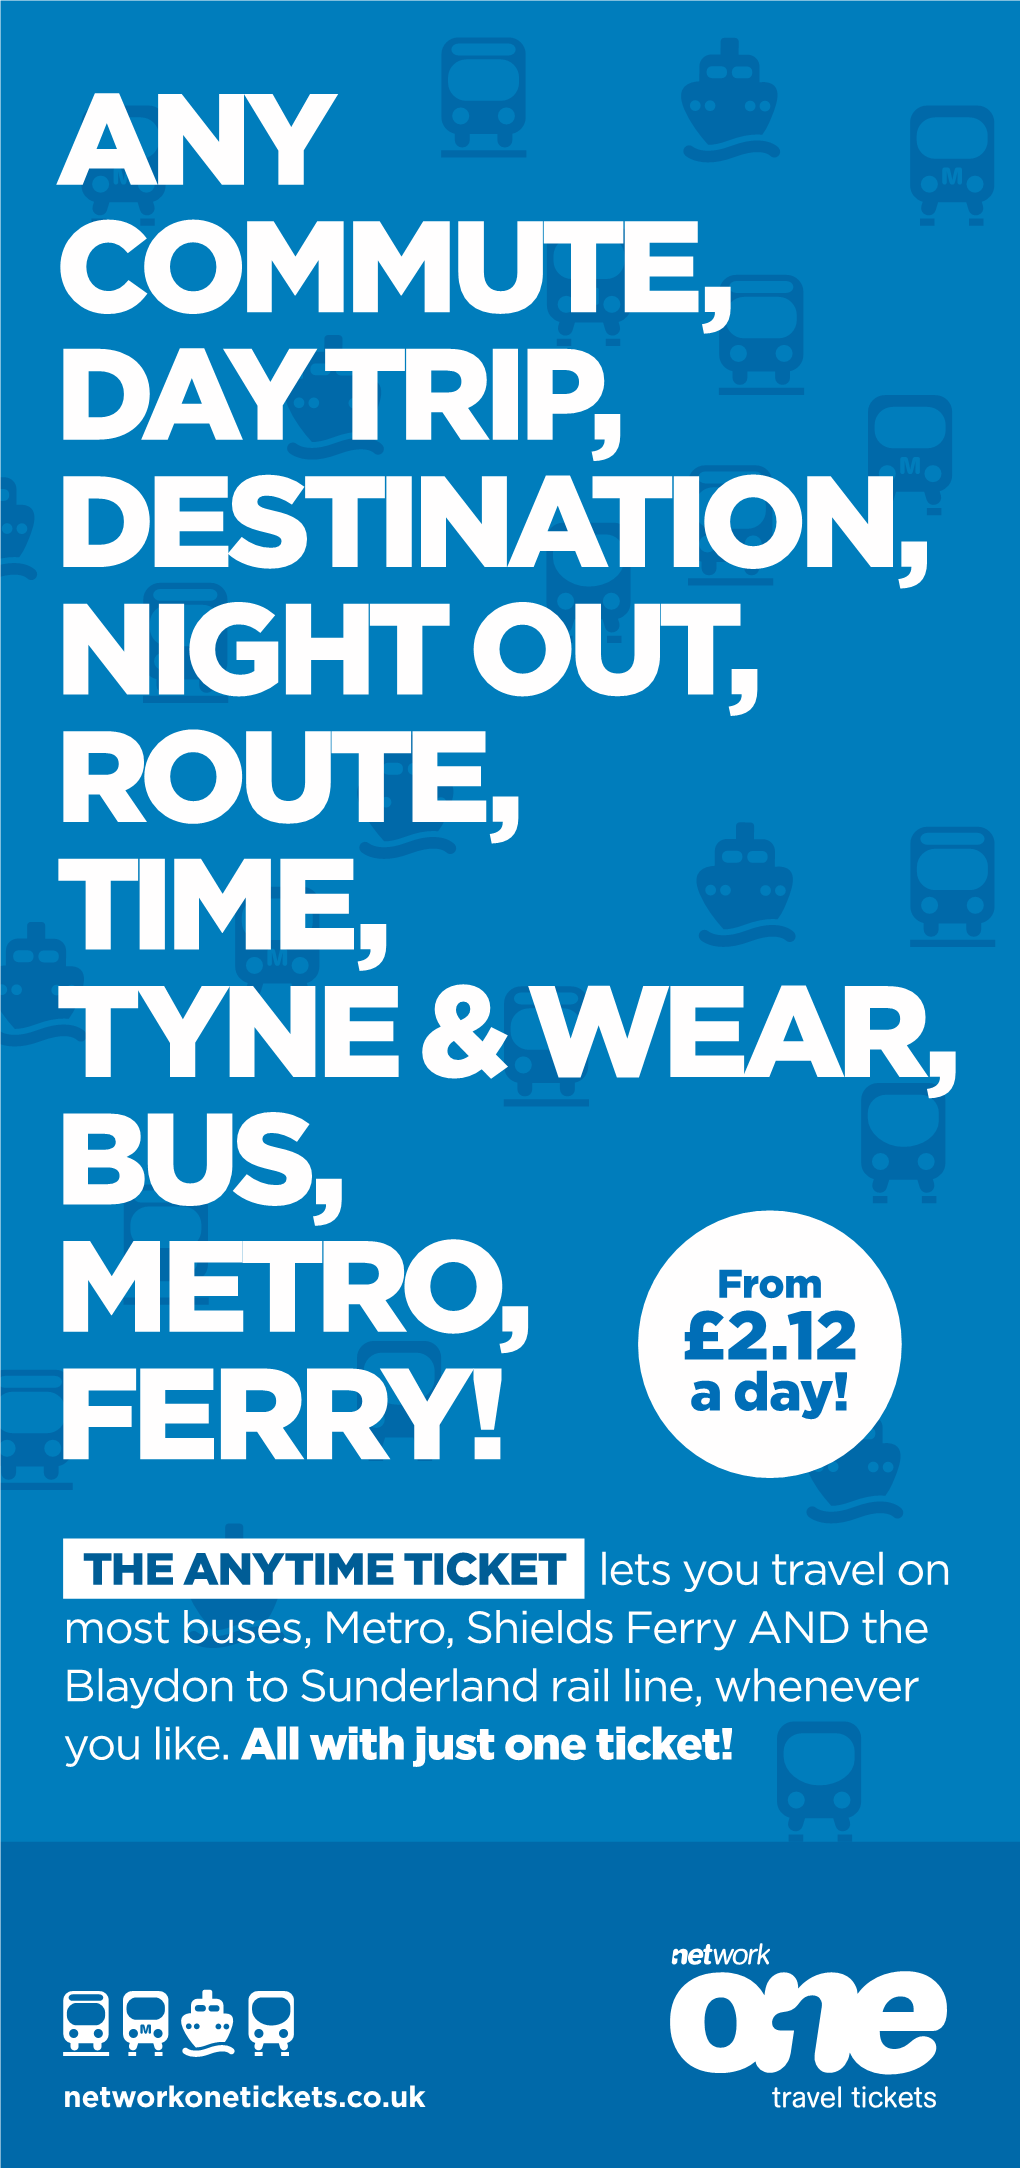 ANY COMMUTE, DAY TRIP, DESTINATION, NIGHT OUT, ROUTE, TIME, TYNE & WEAR, BUS, from METRO, £2.12 FERRY! a Day!